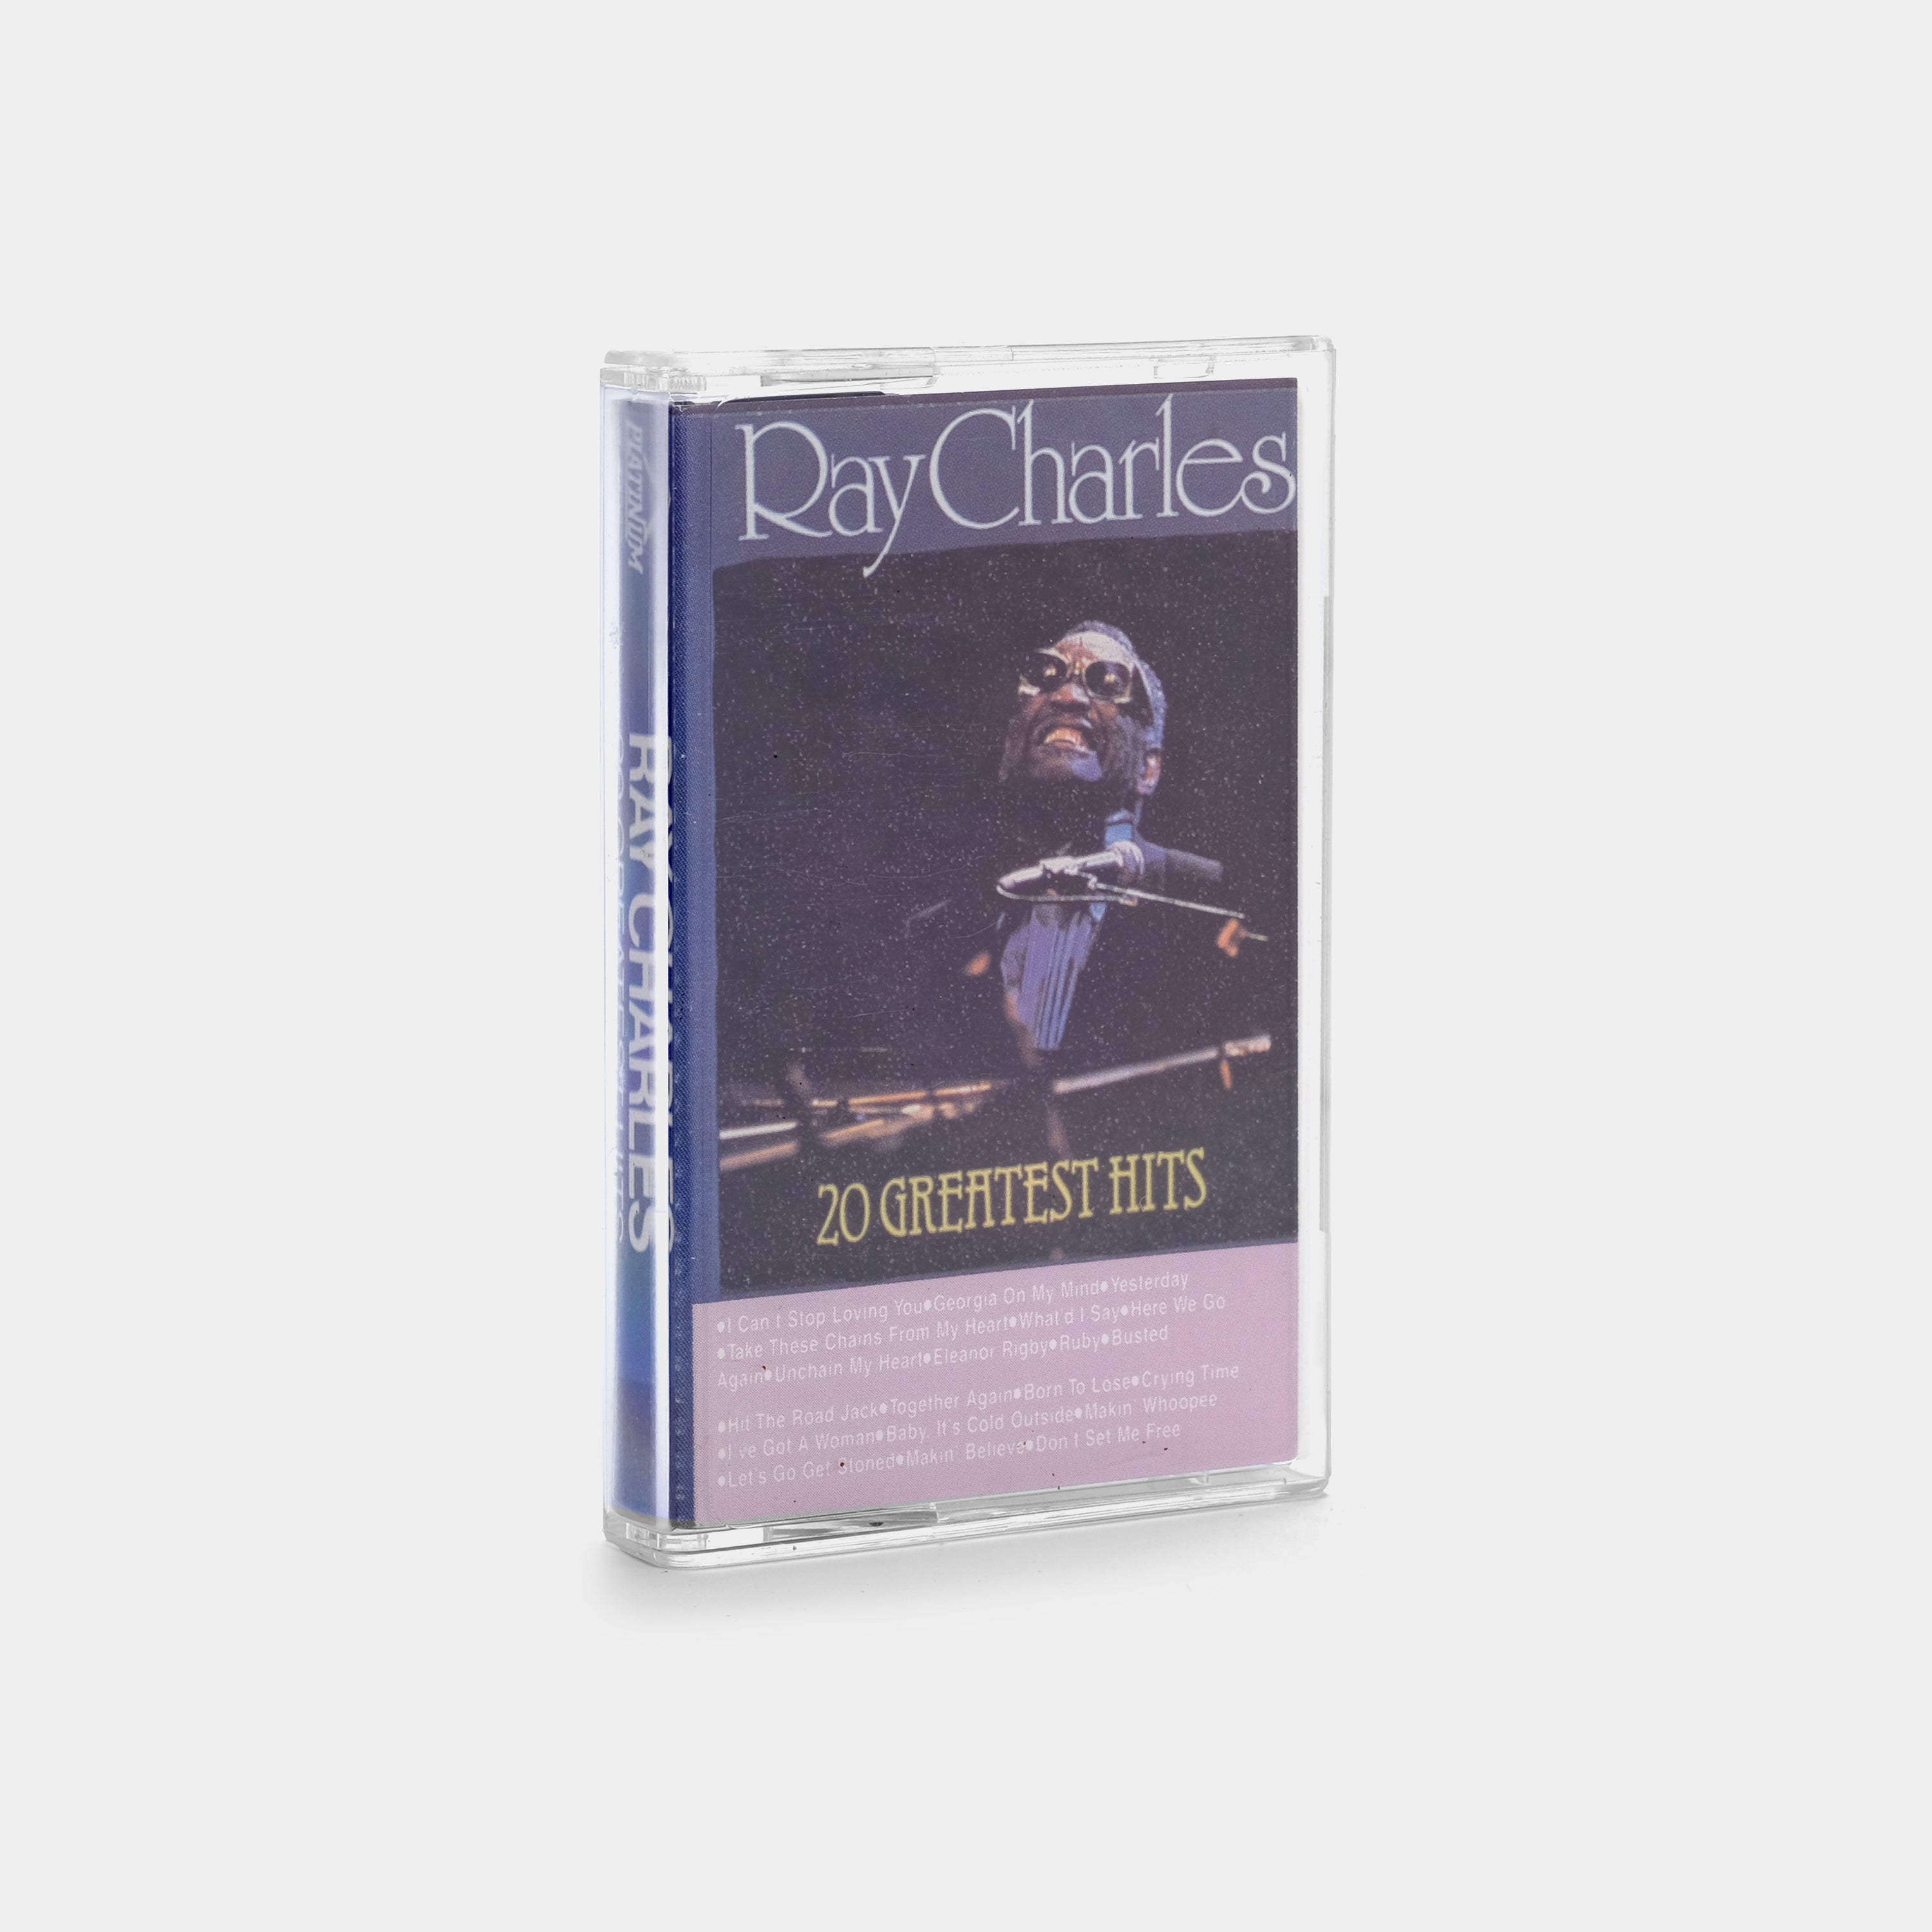 Ray Charles - 20 Greatest Hits Cassette Tape